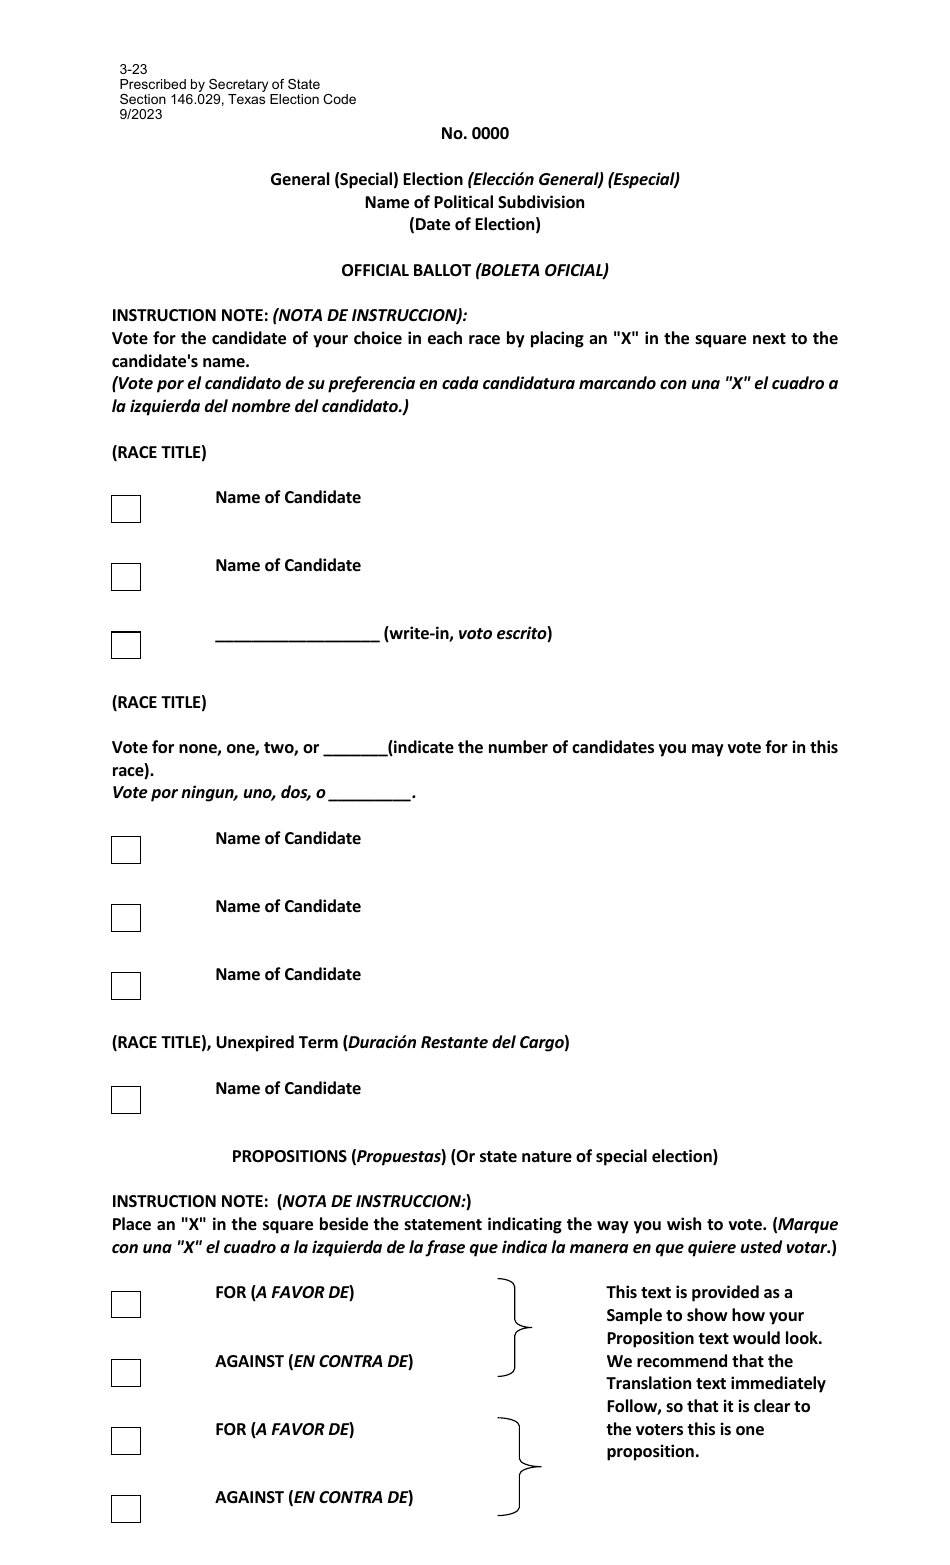 Form 3-23 Model / Sample Ballot for a General or Special Election - Texas (English / Spanish), Page 1